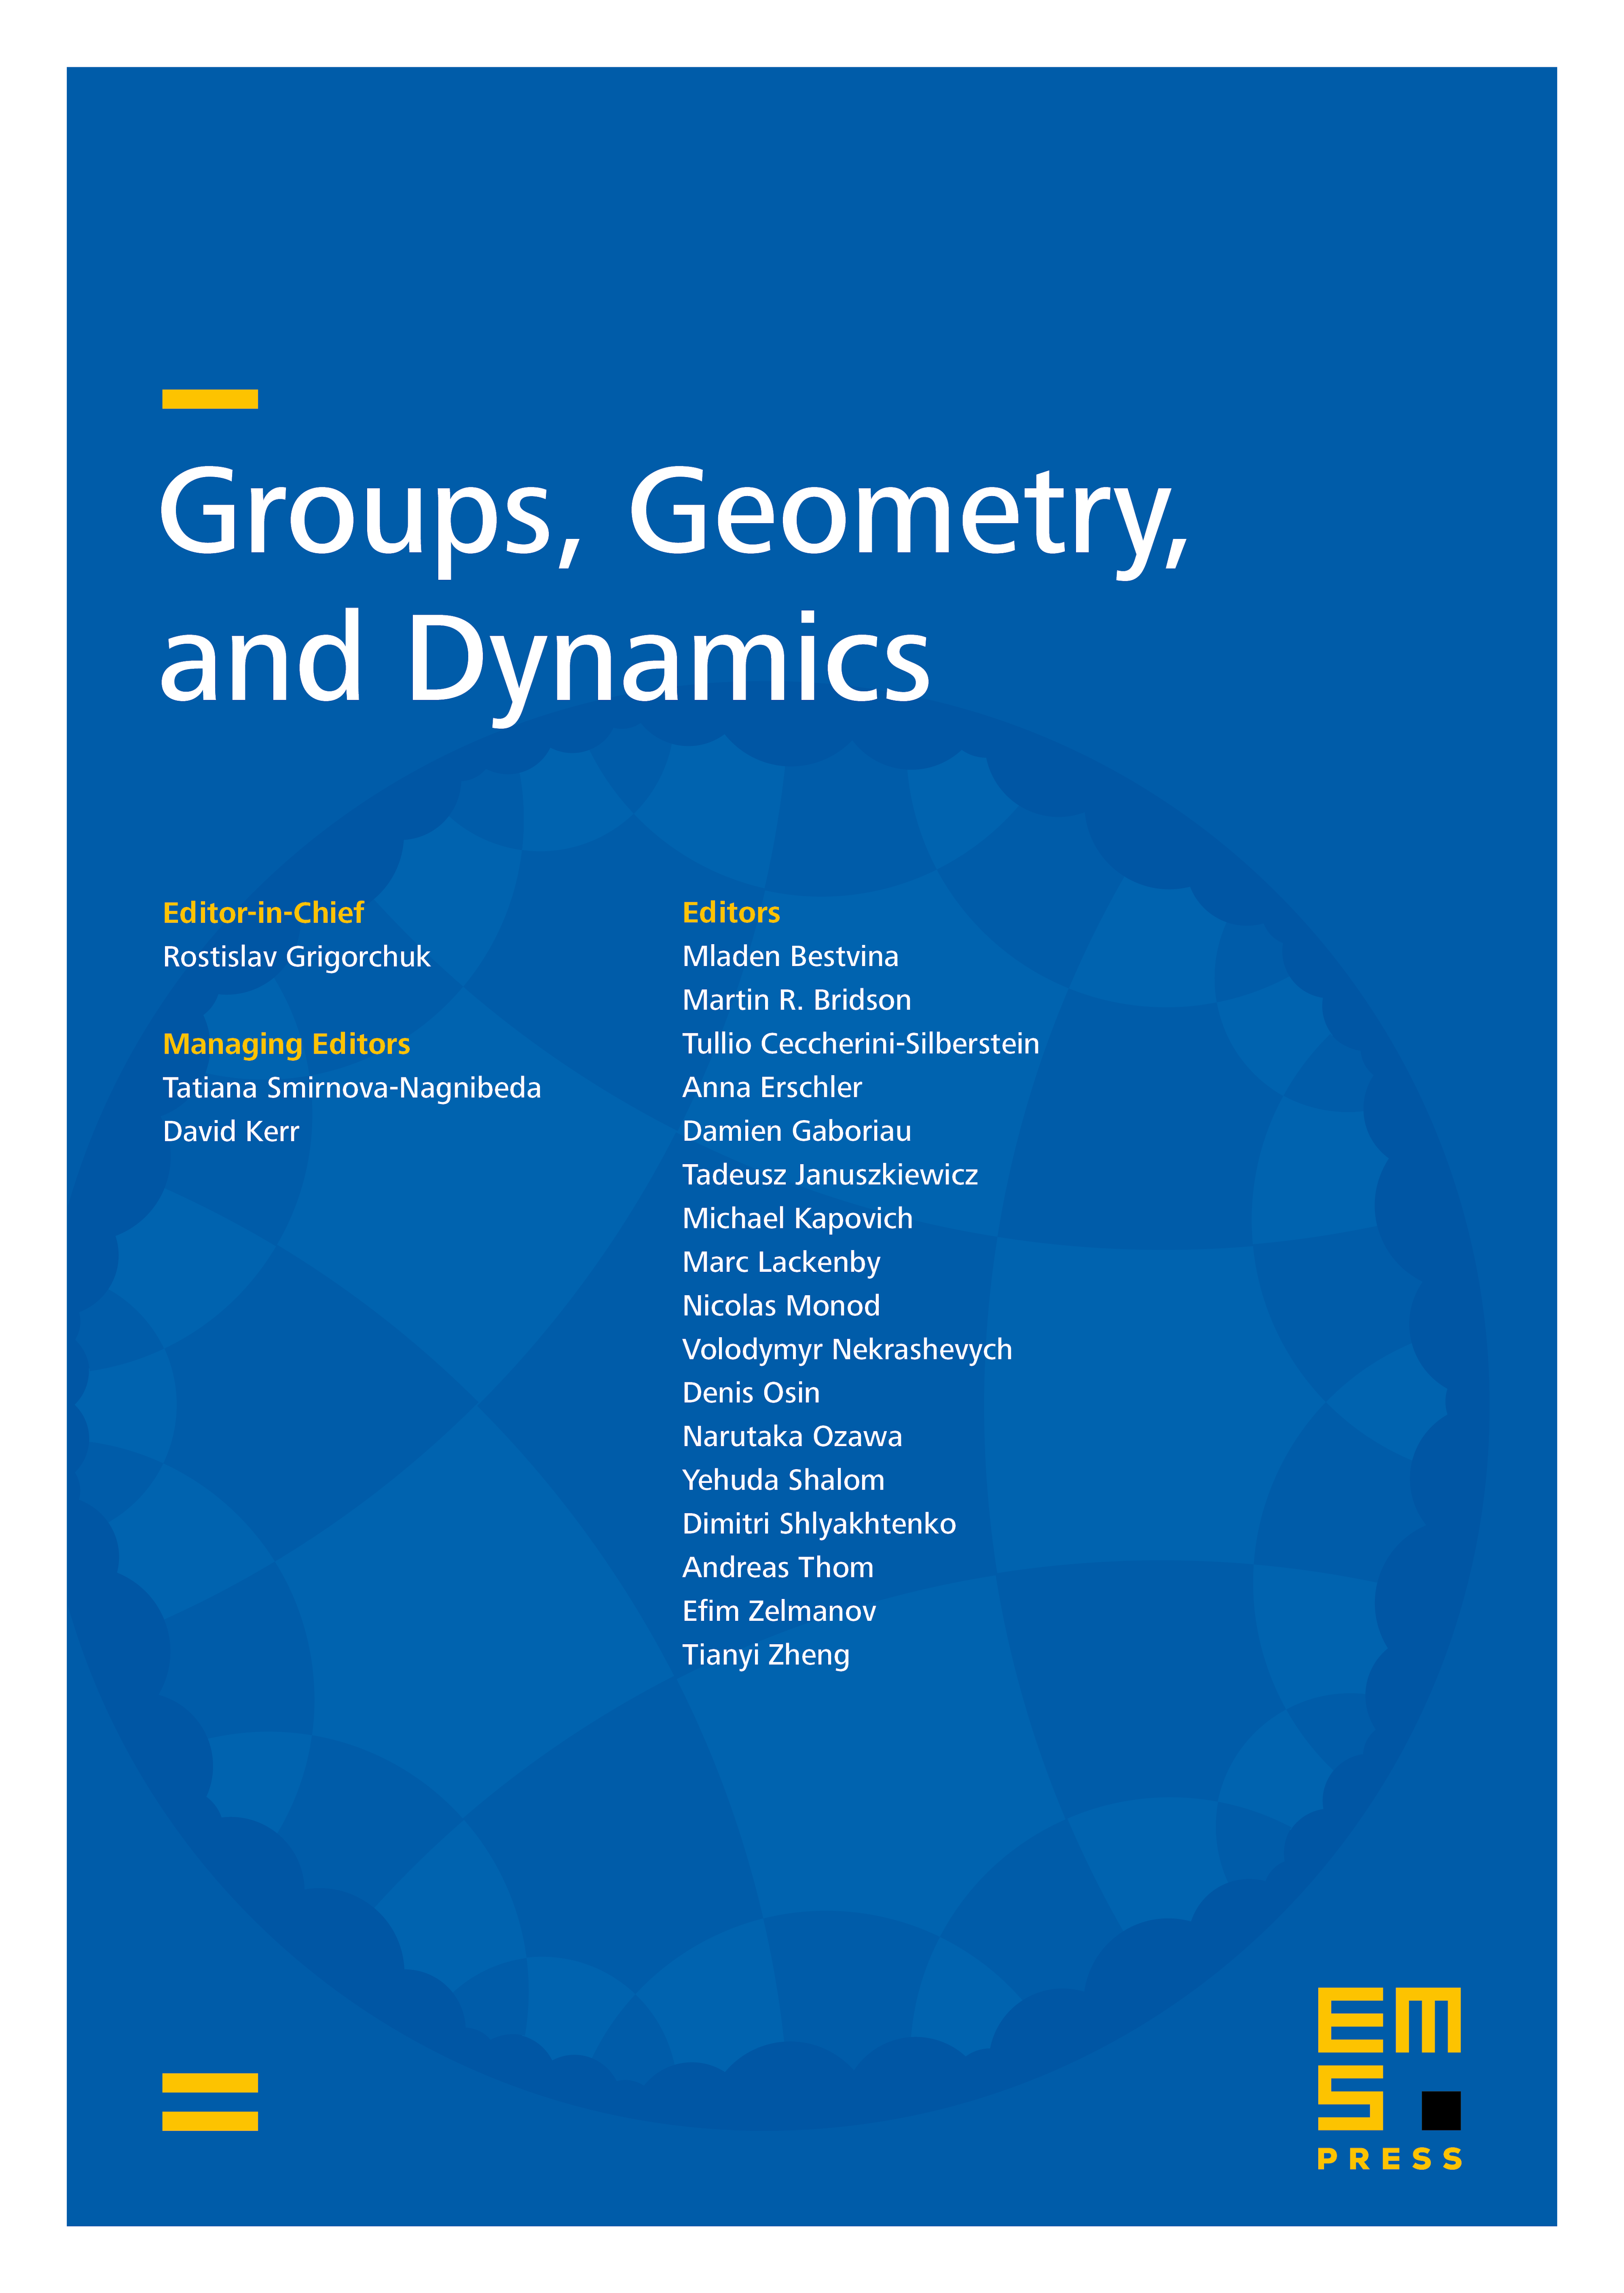 Characterisations of algebraic properties of groups in terms of harmonic functions cover